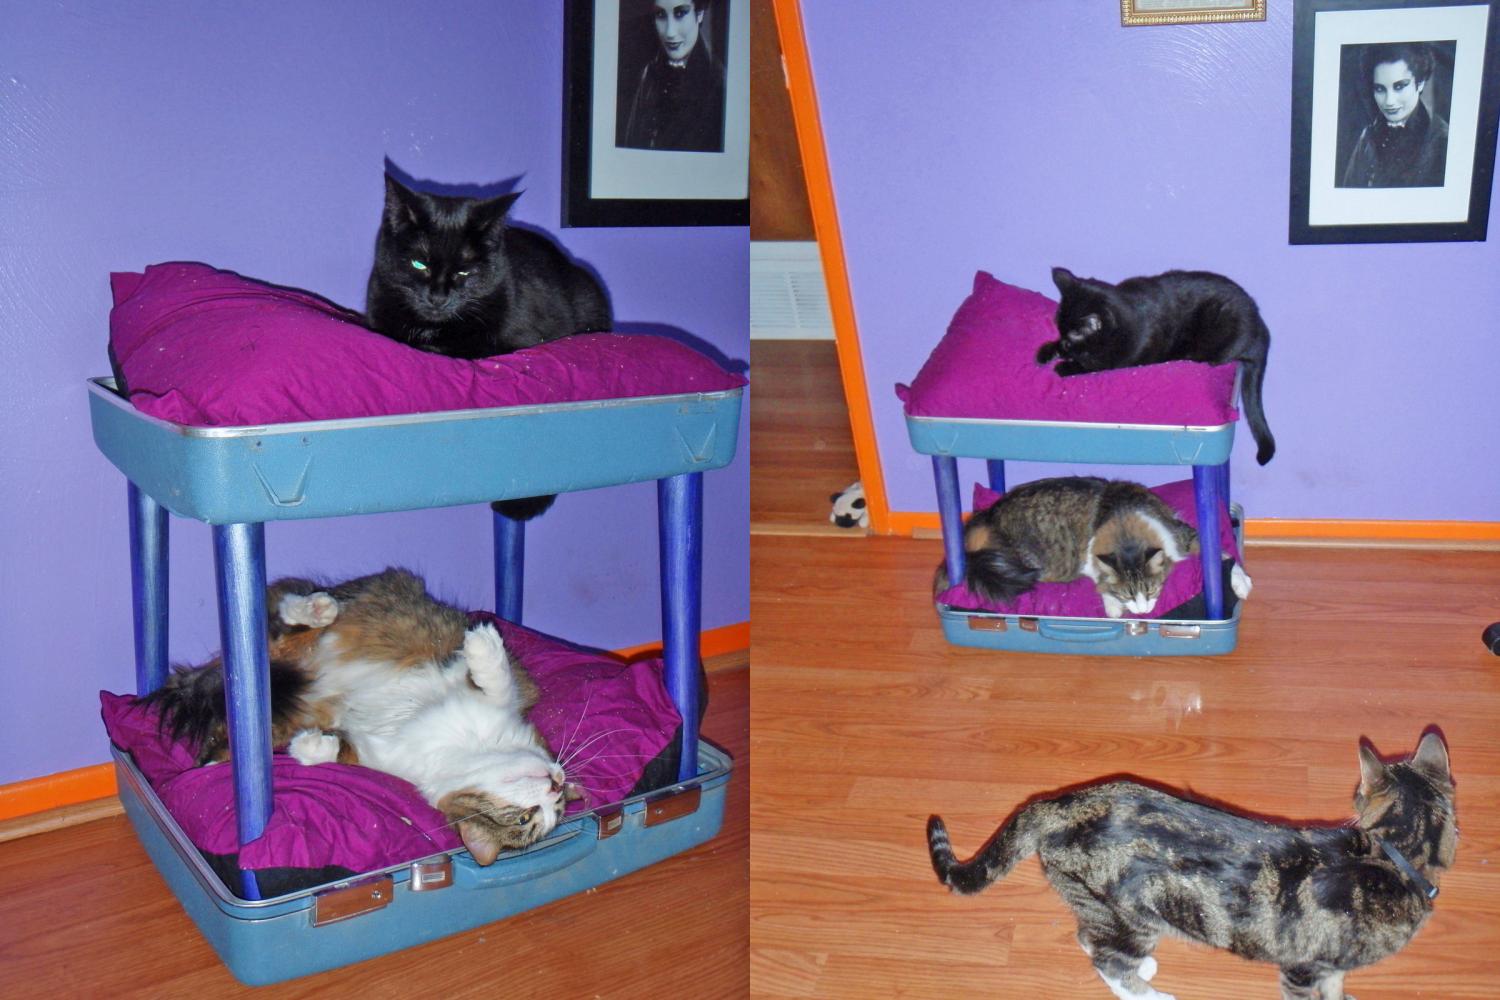 This Suitcase Cat Bunk Bed Is A, How To Make Cat Bunk Beds